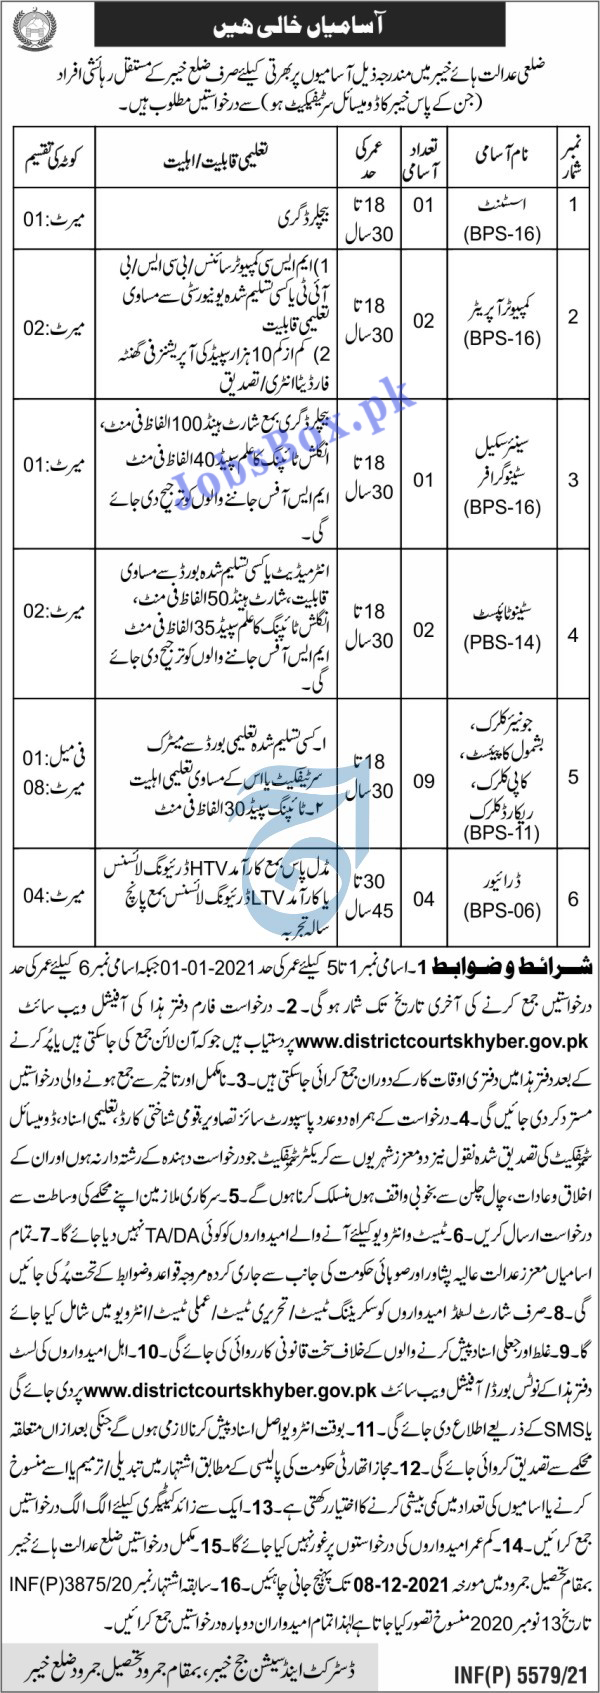 District Courts Khyber Jobs 2021 - Download Application Form